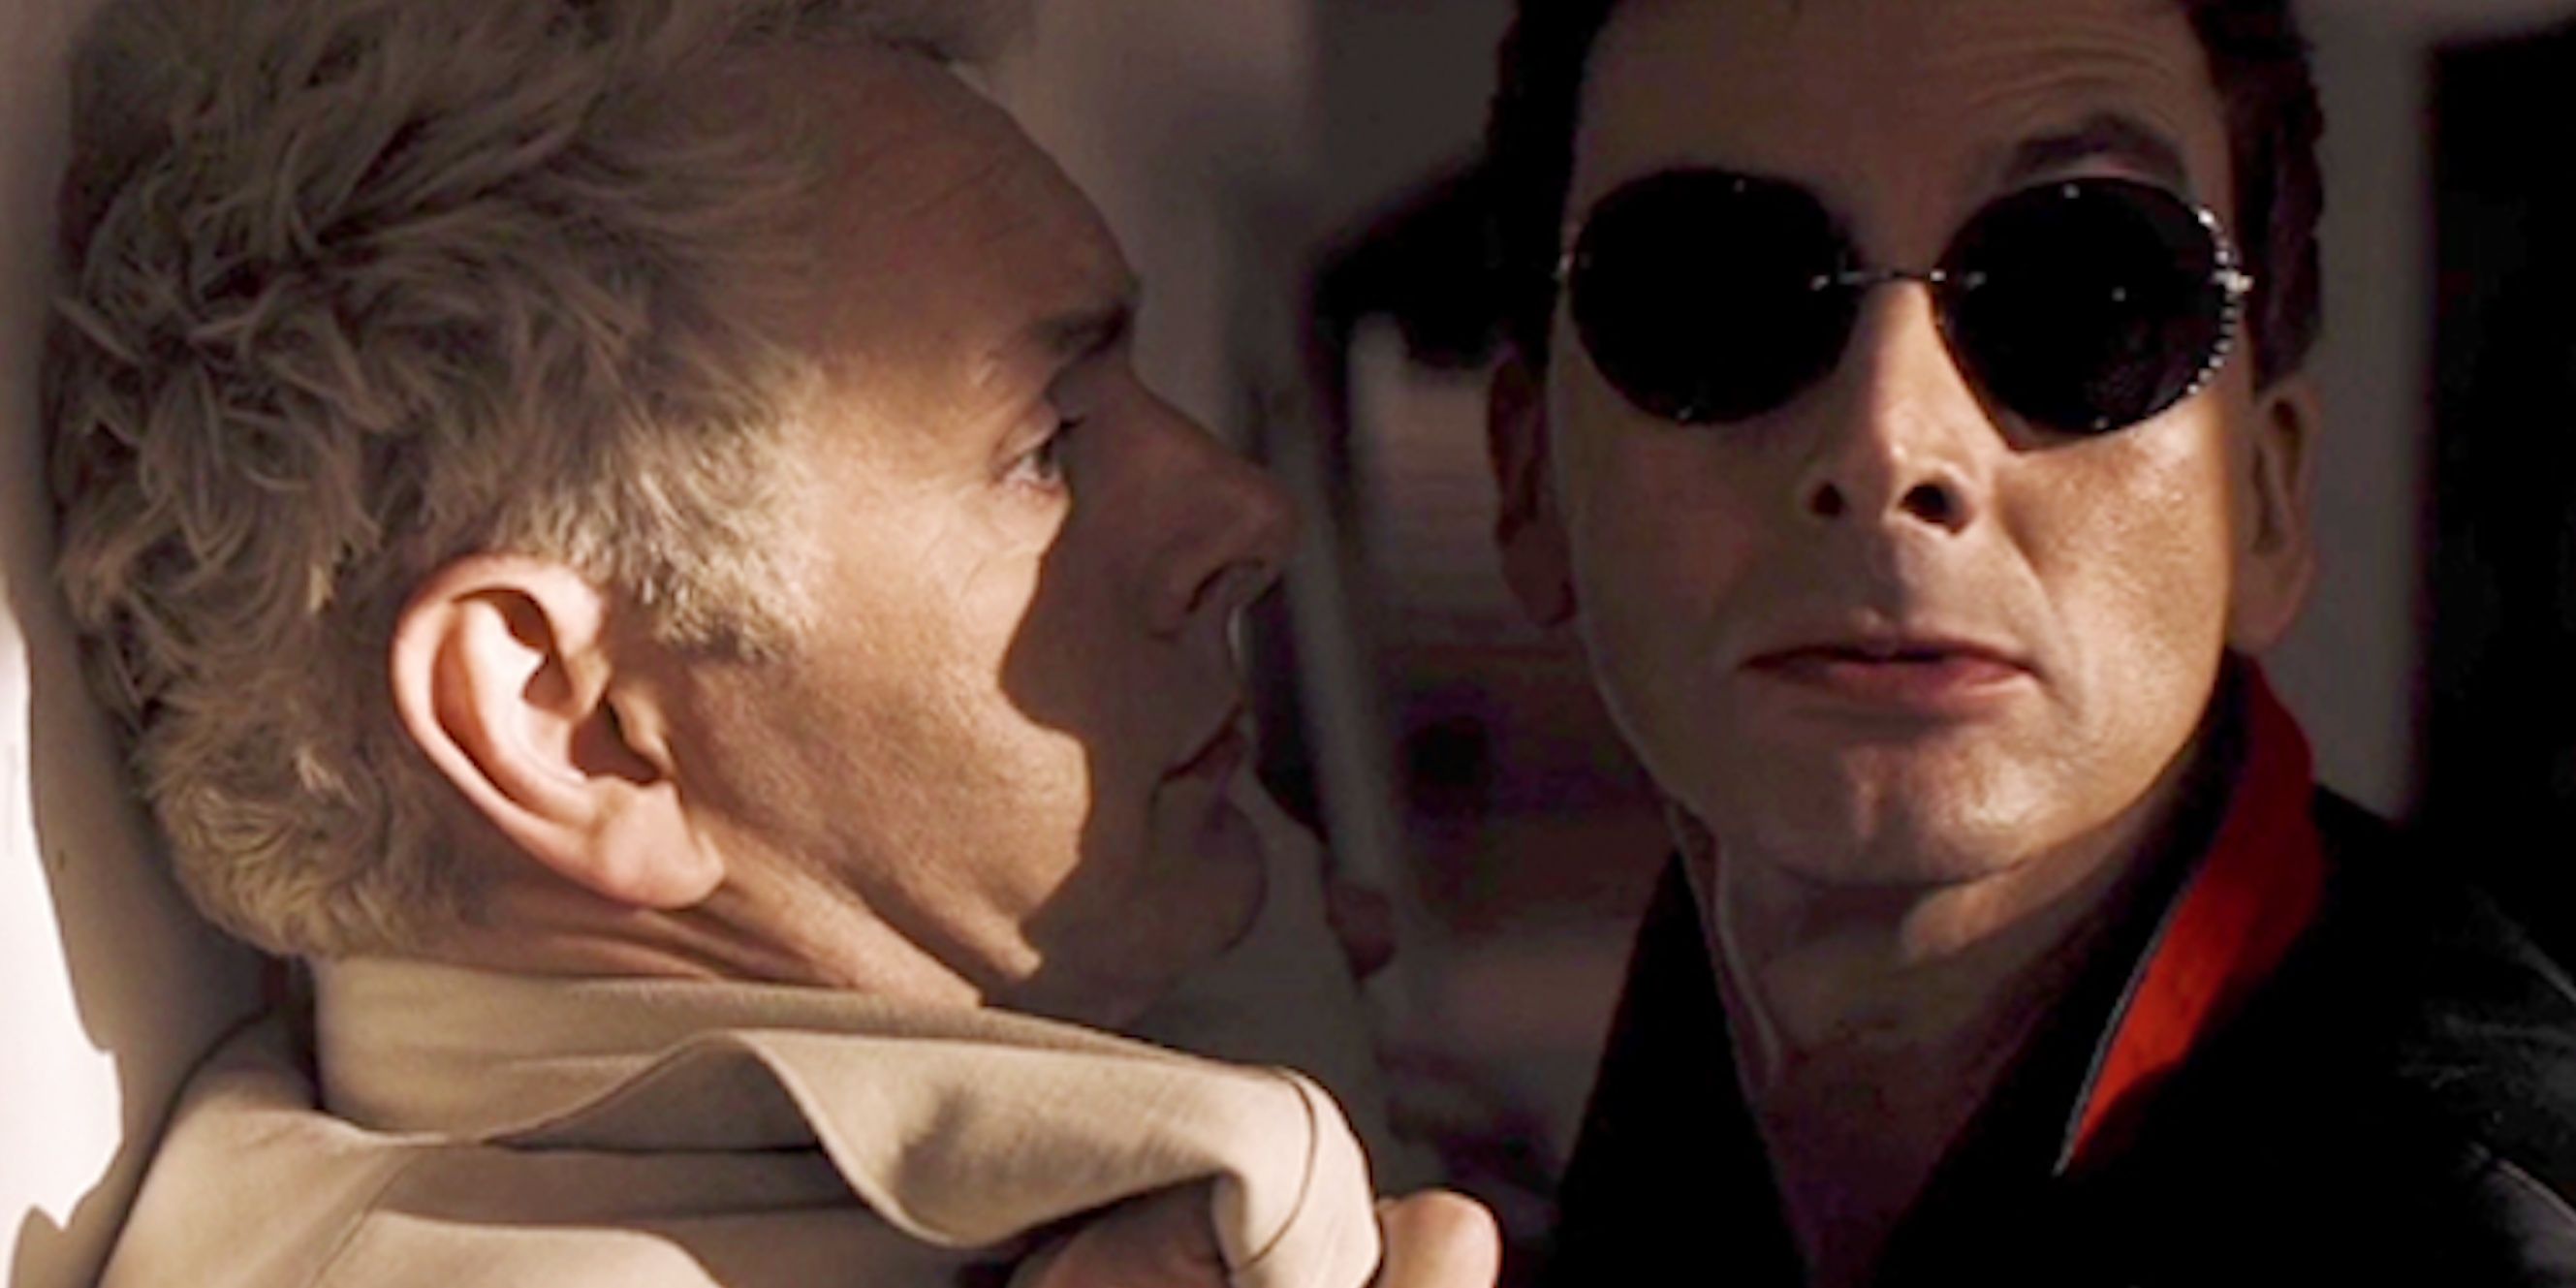 Crowley pins Aziraphale in Good Omens, for calling him nice.